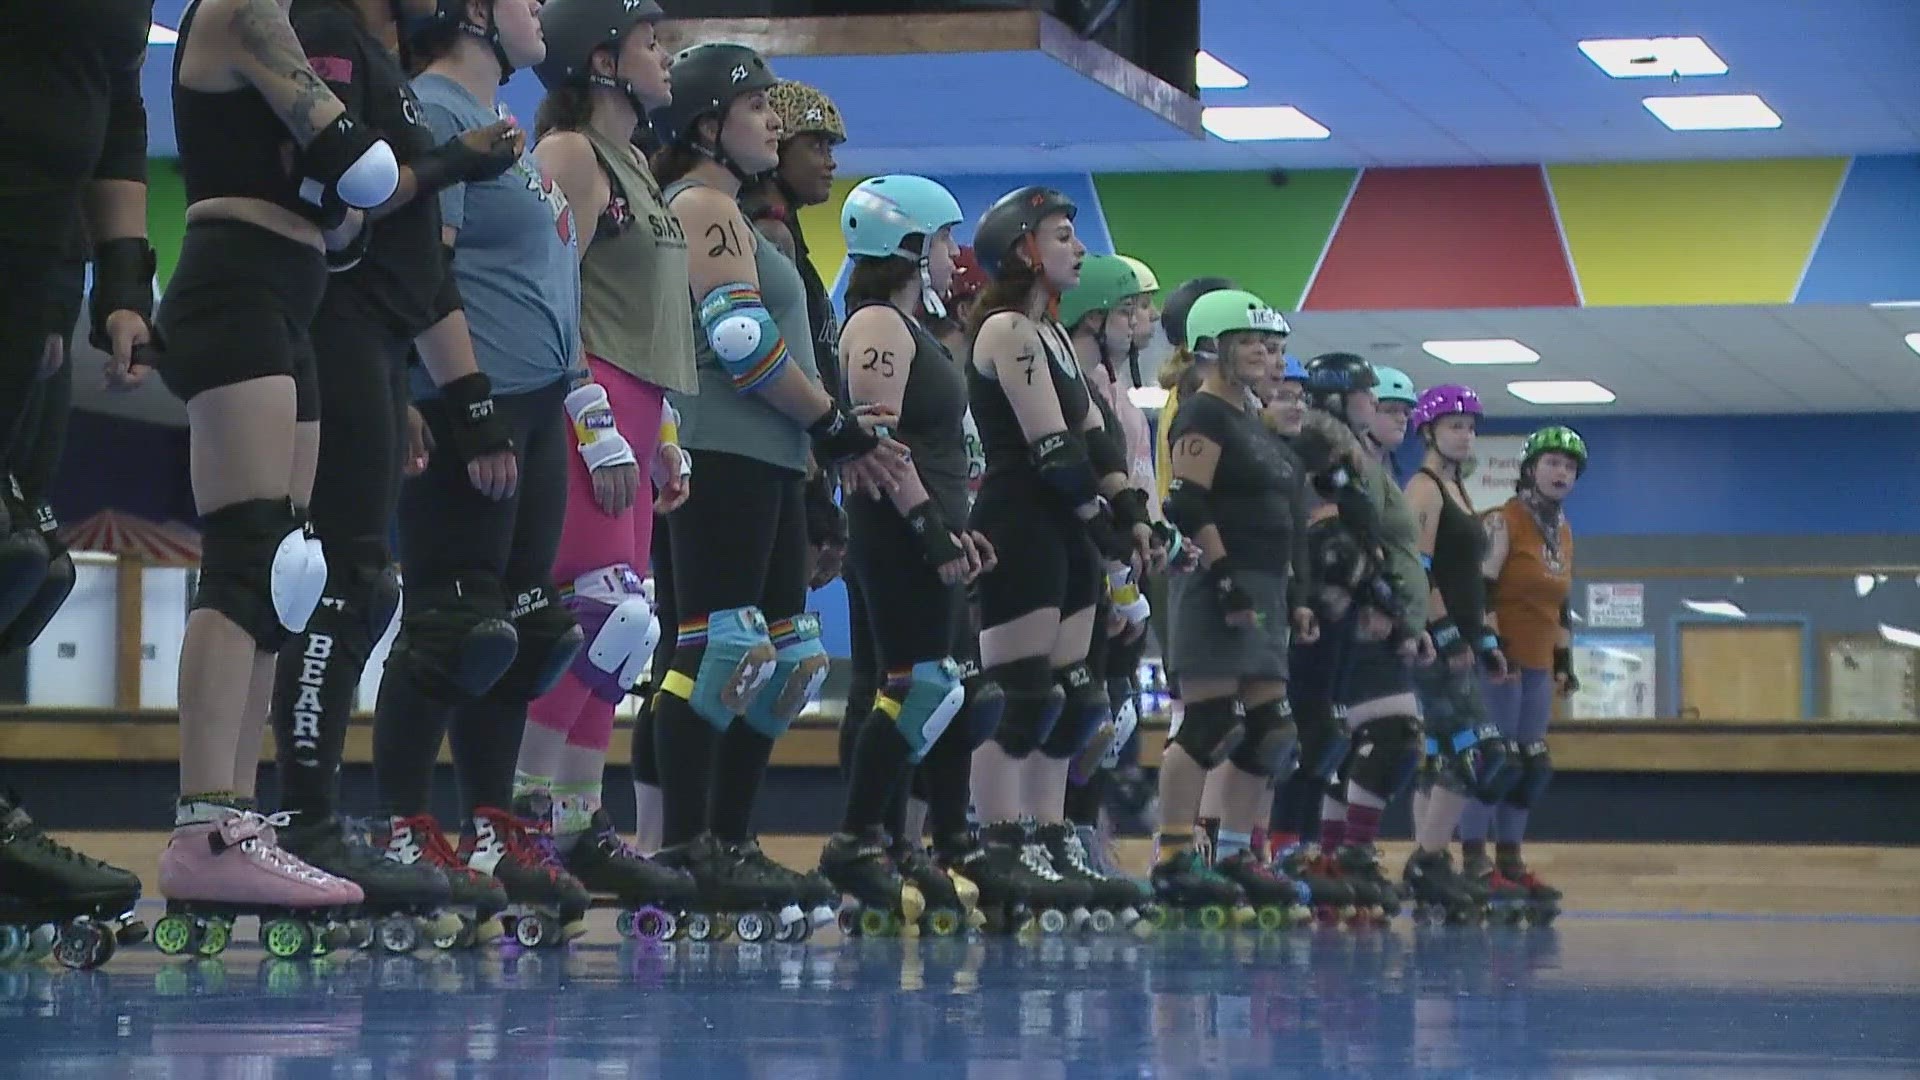 It's the longest running and largest roller derby league in the state, and they're now looking for more people to join.